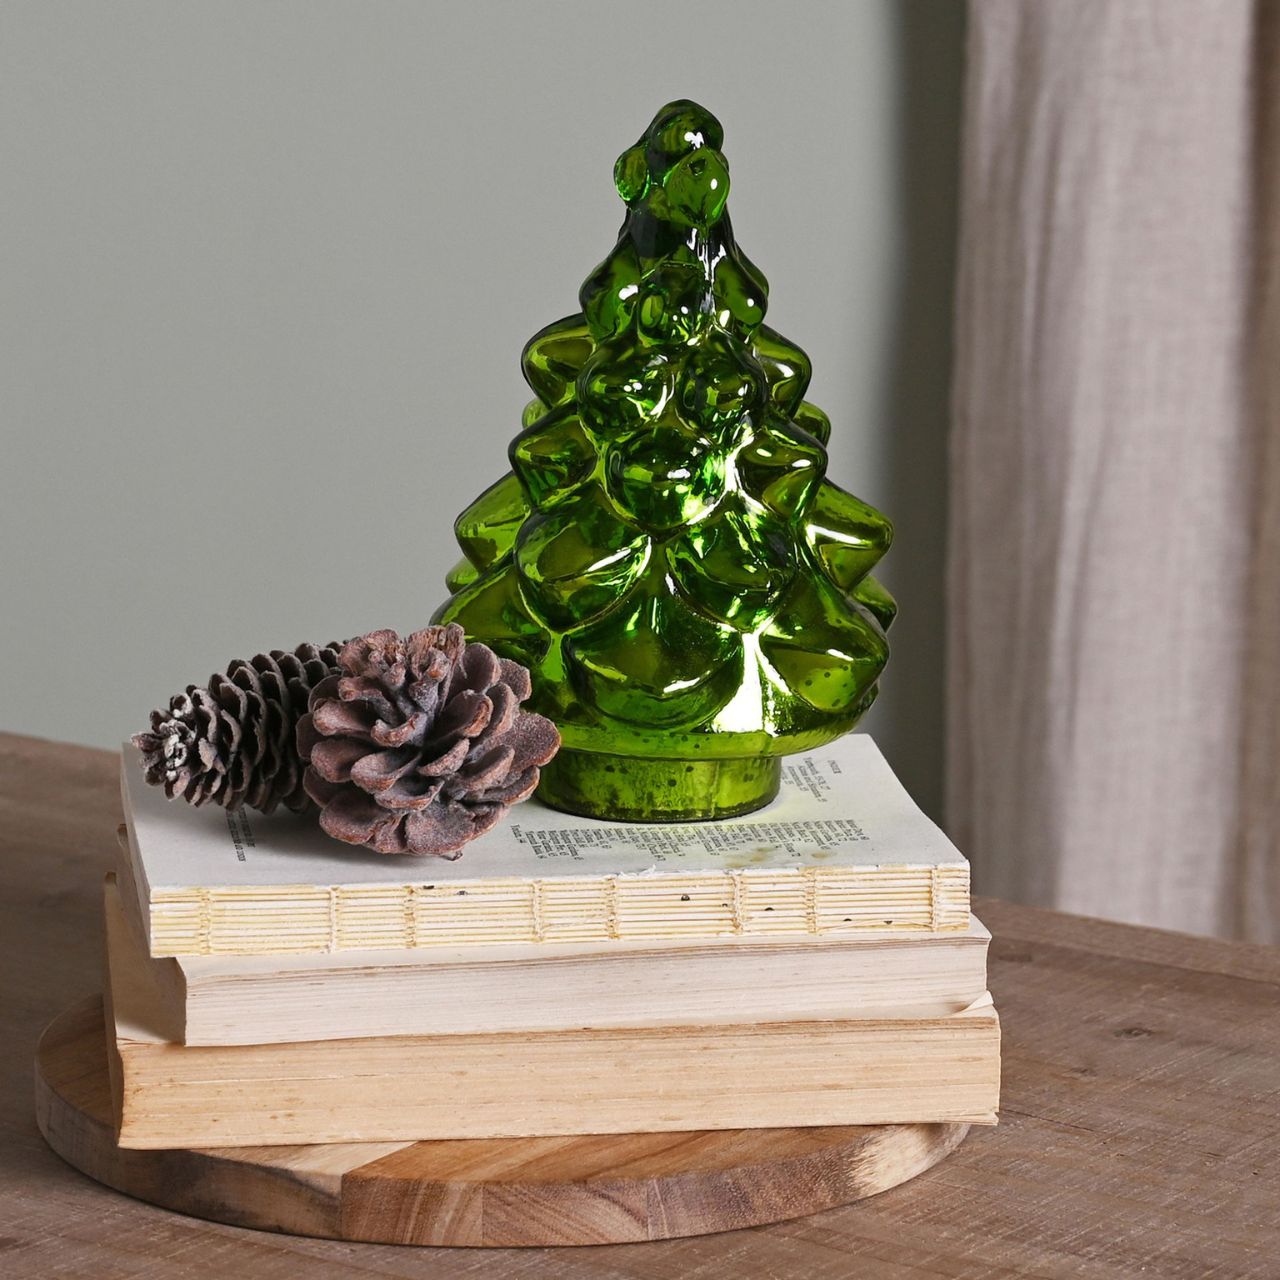 Green Recycled Glass Tree  A recycled glass green Christmas tree ornament from THE SEASONAL GIFT CO.  This affectionately designed ornament makes a delightful addition to homes during the festive period.